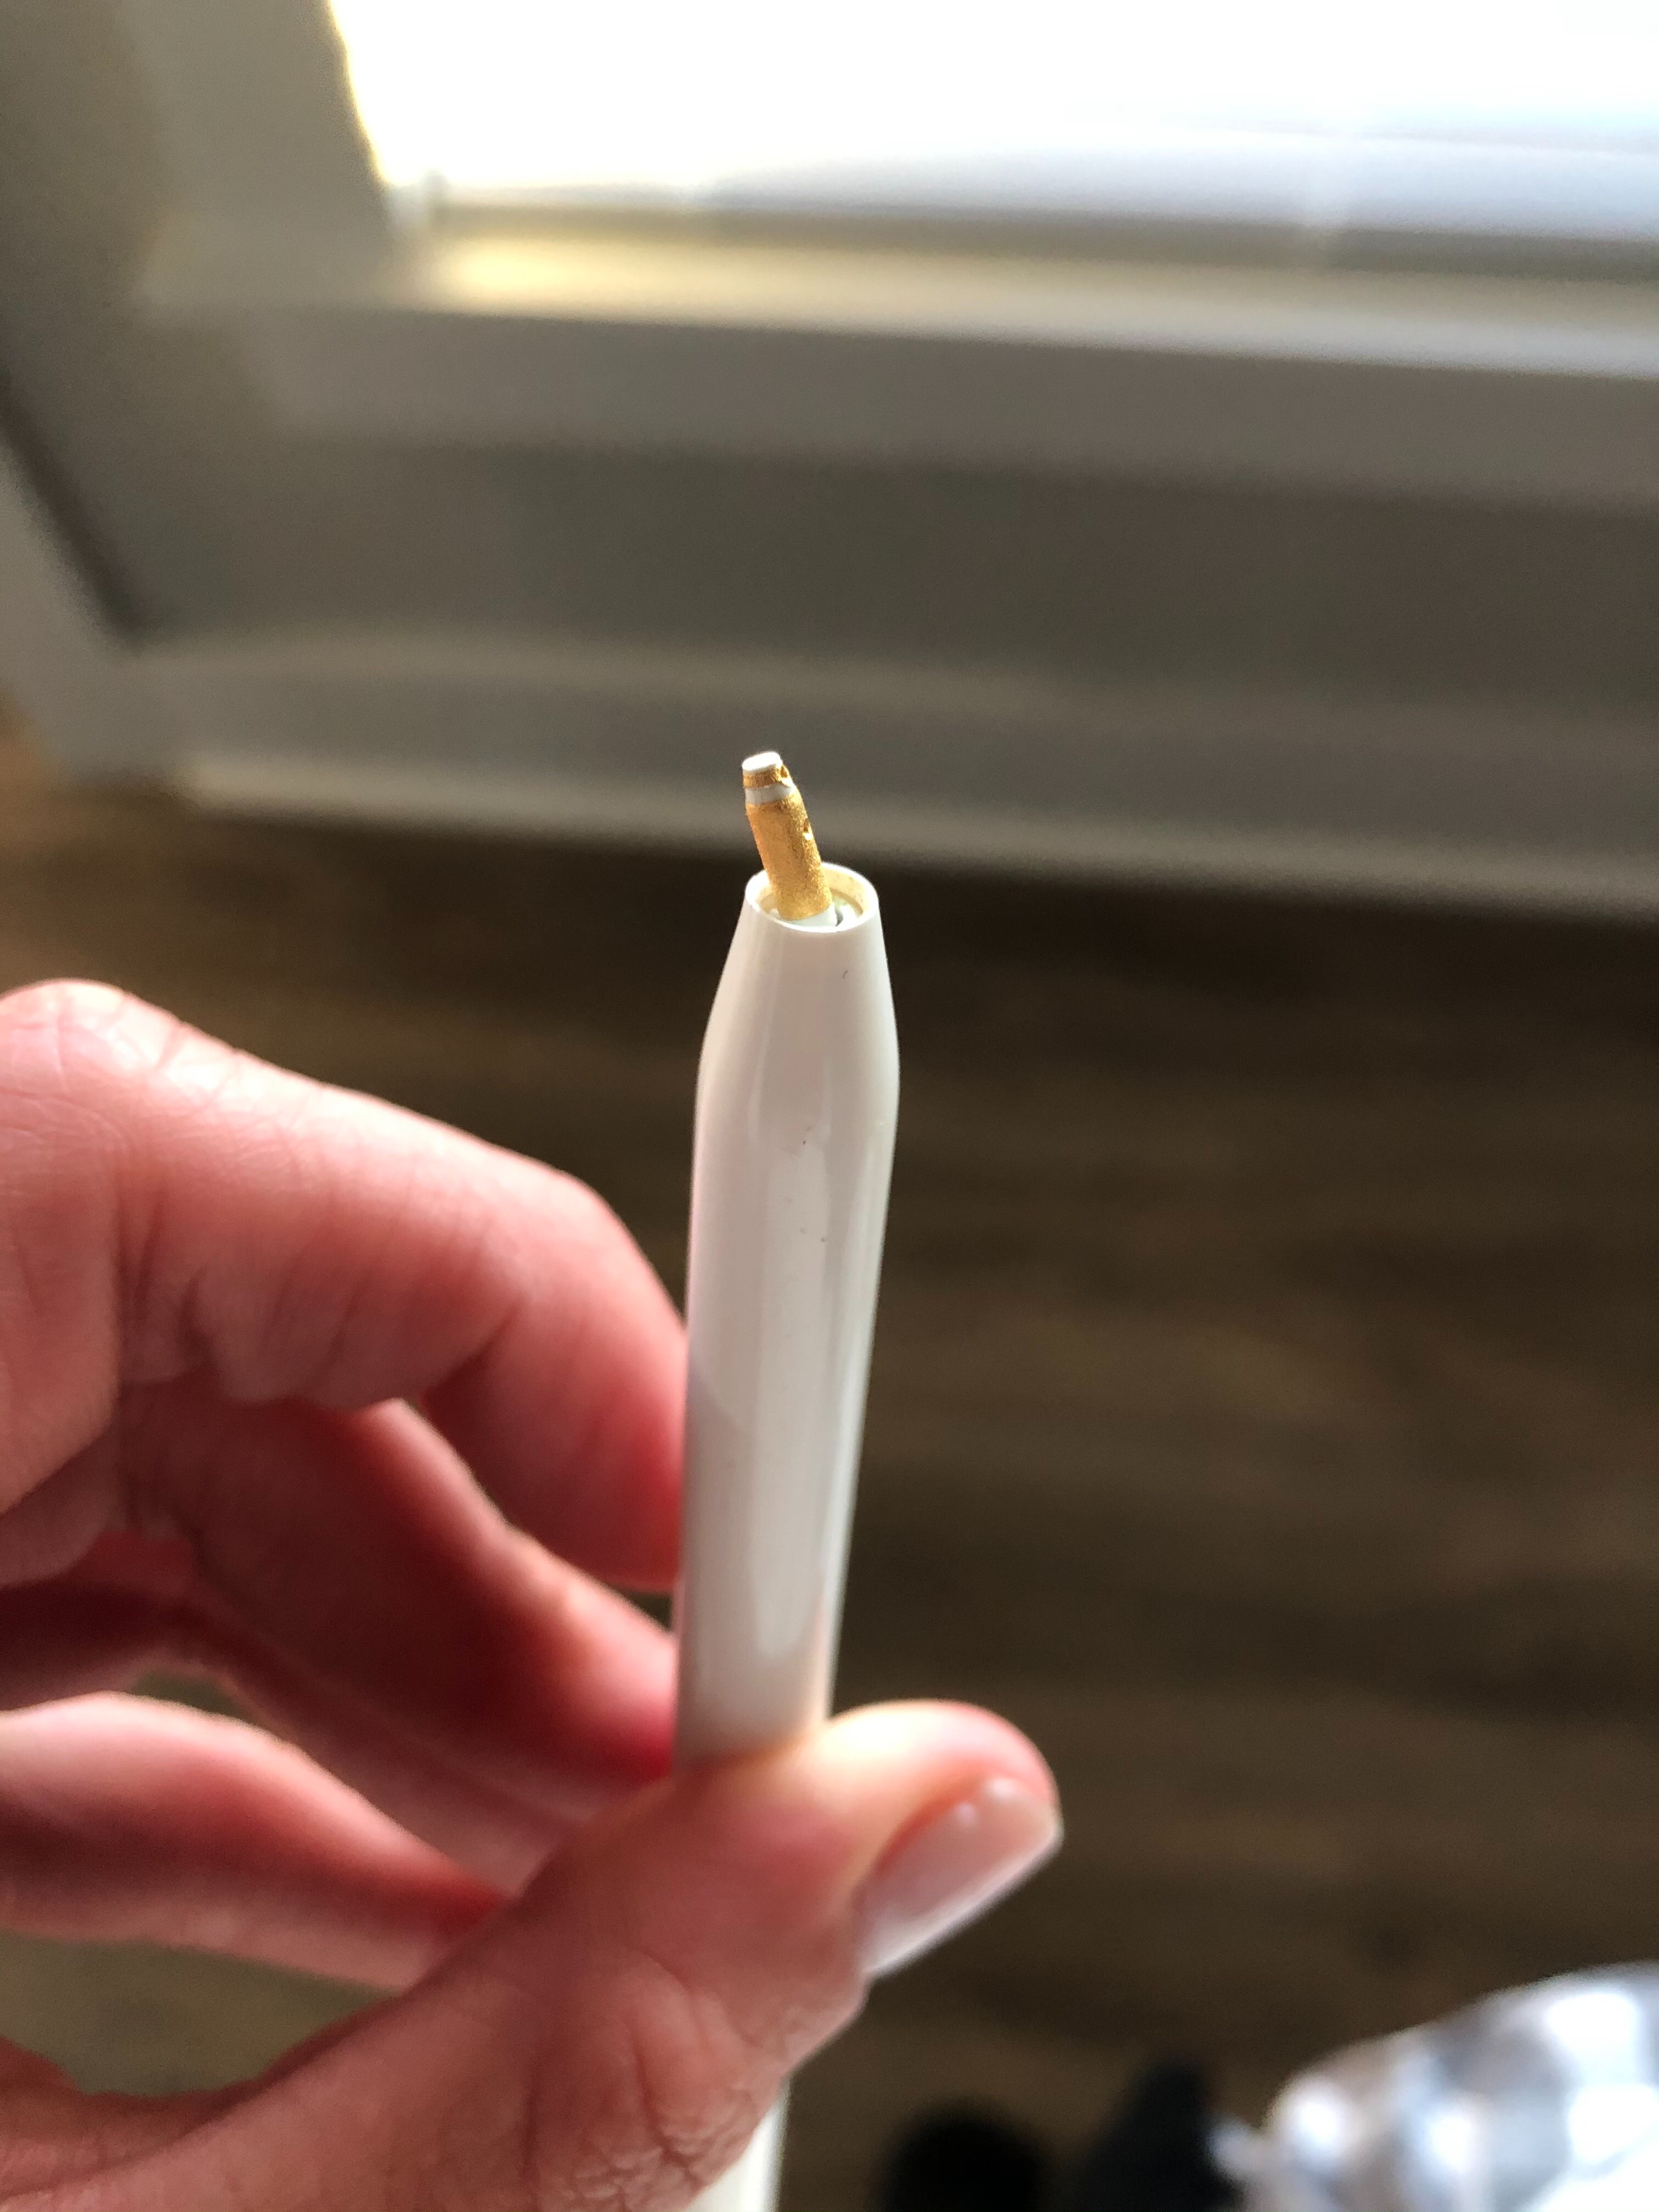 How do I know if my Apple Pencil is defective?